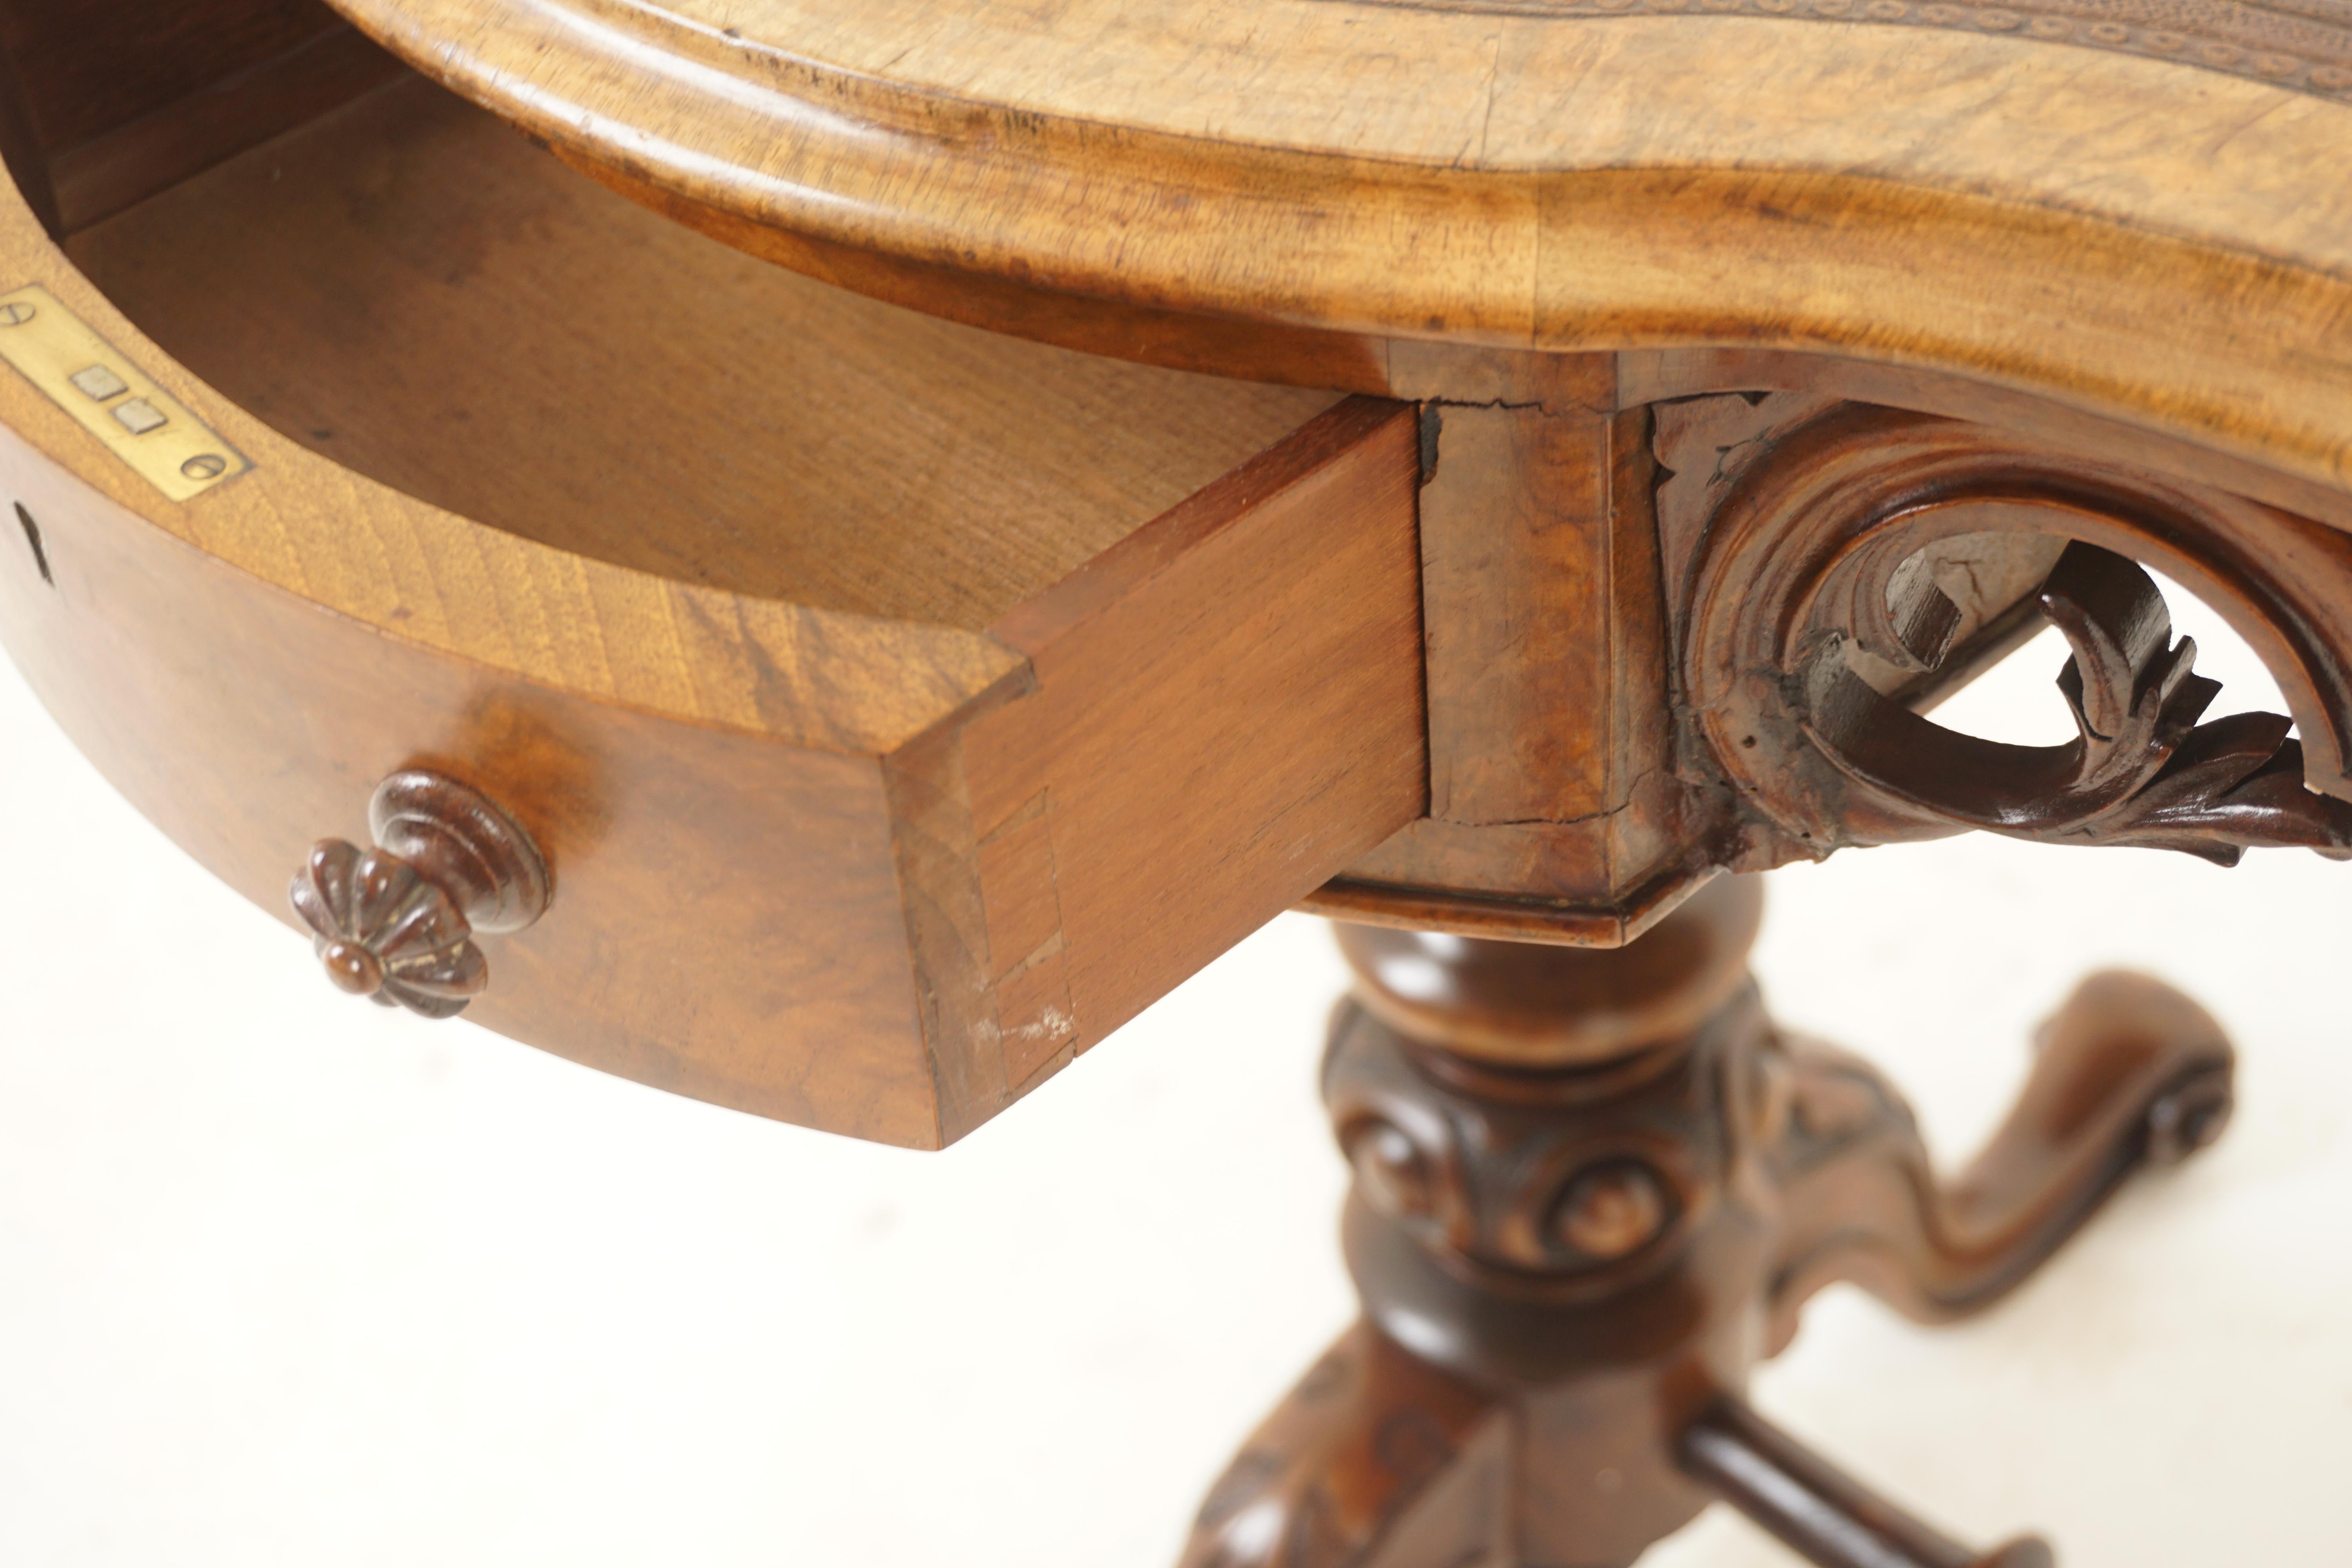 Antique Burr Walnut Kidney Shaped Desk, Writing Table, Scotland 1870, H1178 In Good Condition For Sale In Vancouver, BC